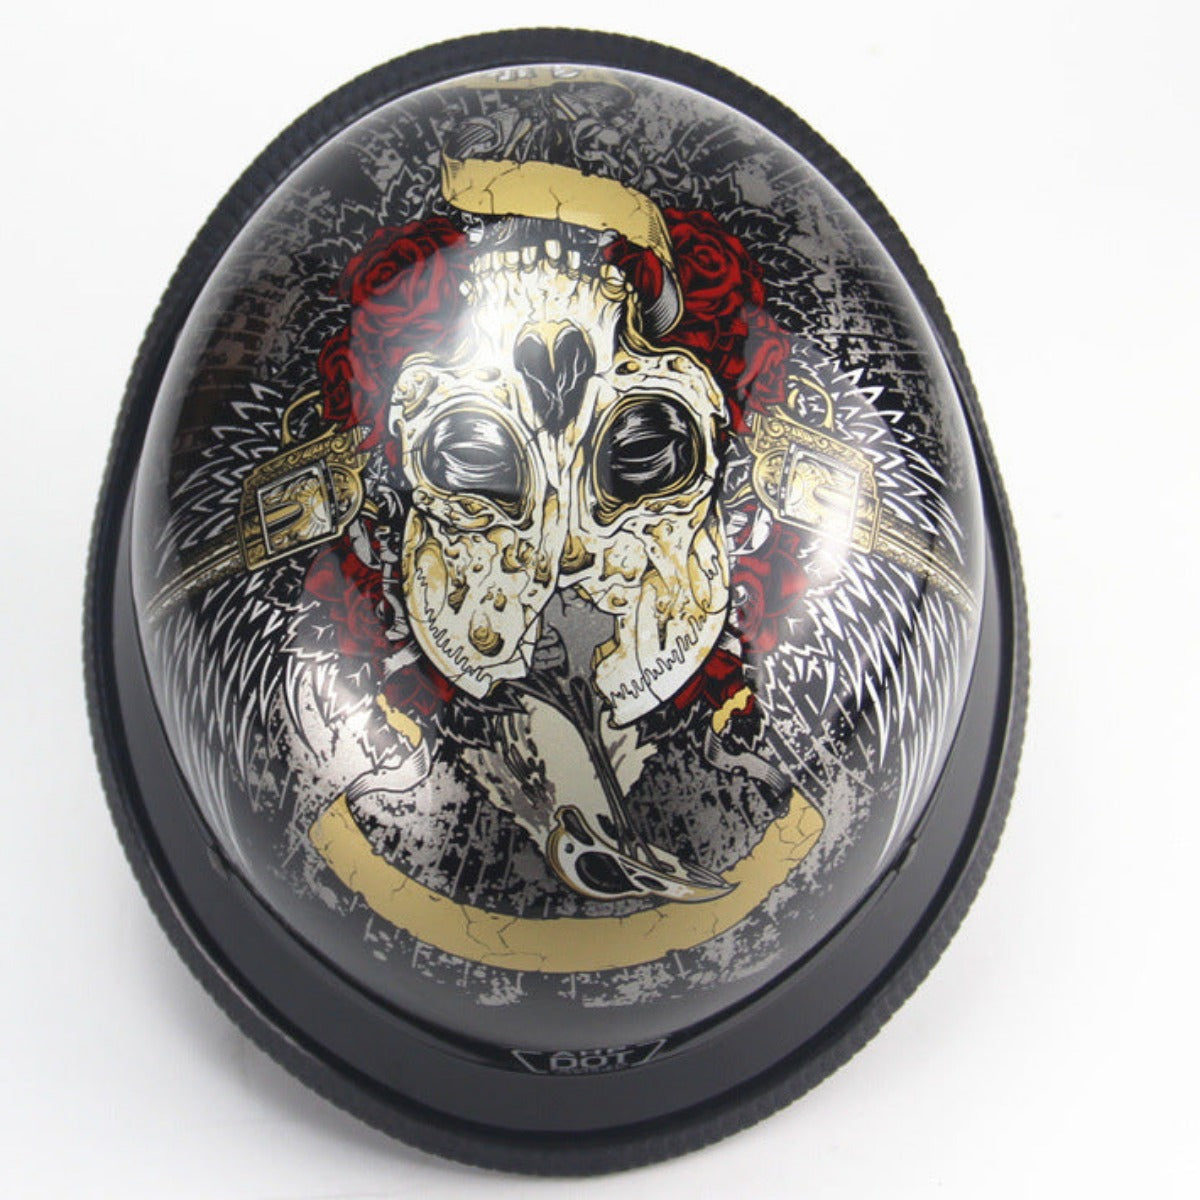 A Skull Cap Motorcycle Helmet, Gloss Black with a skull and roses design, DOT approved.